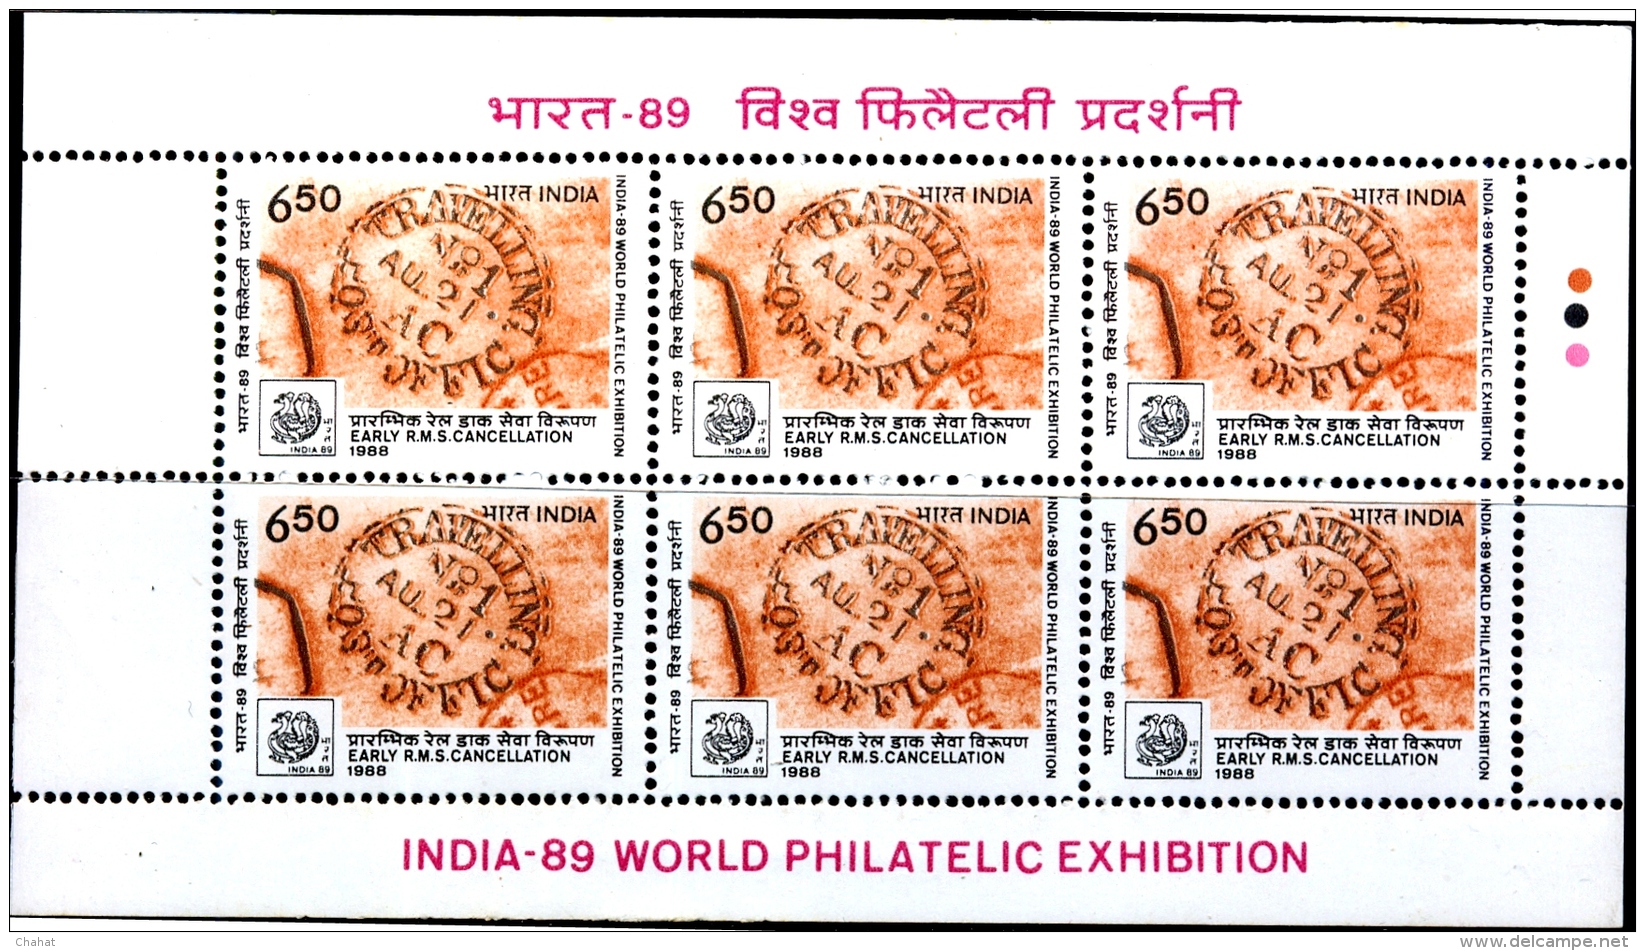 EARLY RMS CANCELLATIONS-ERROR-INDIA 89-WORLD PHILATELIC EXHIBITION-BOOKLET PANES-EXTREMELY SCARCE-MNH-M-146